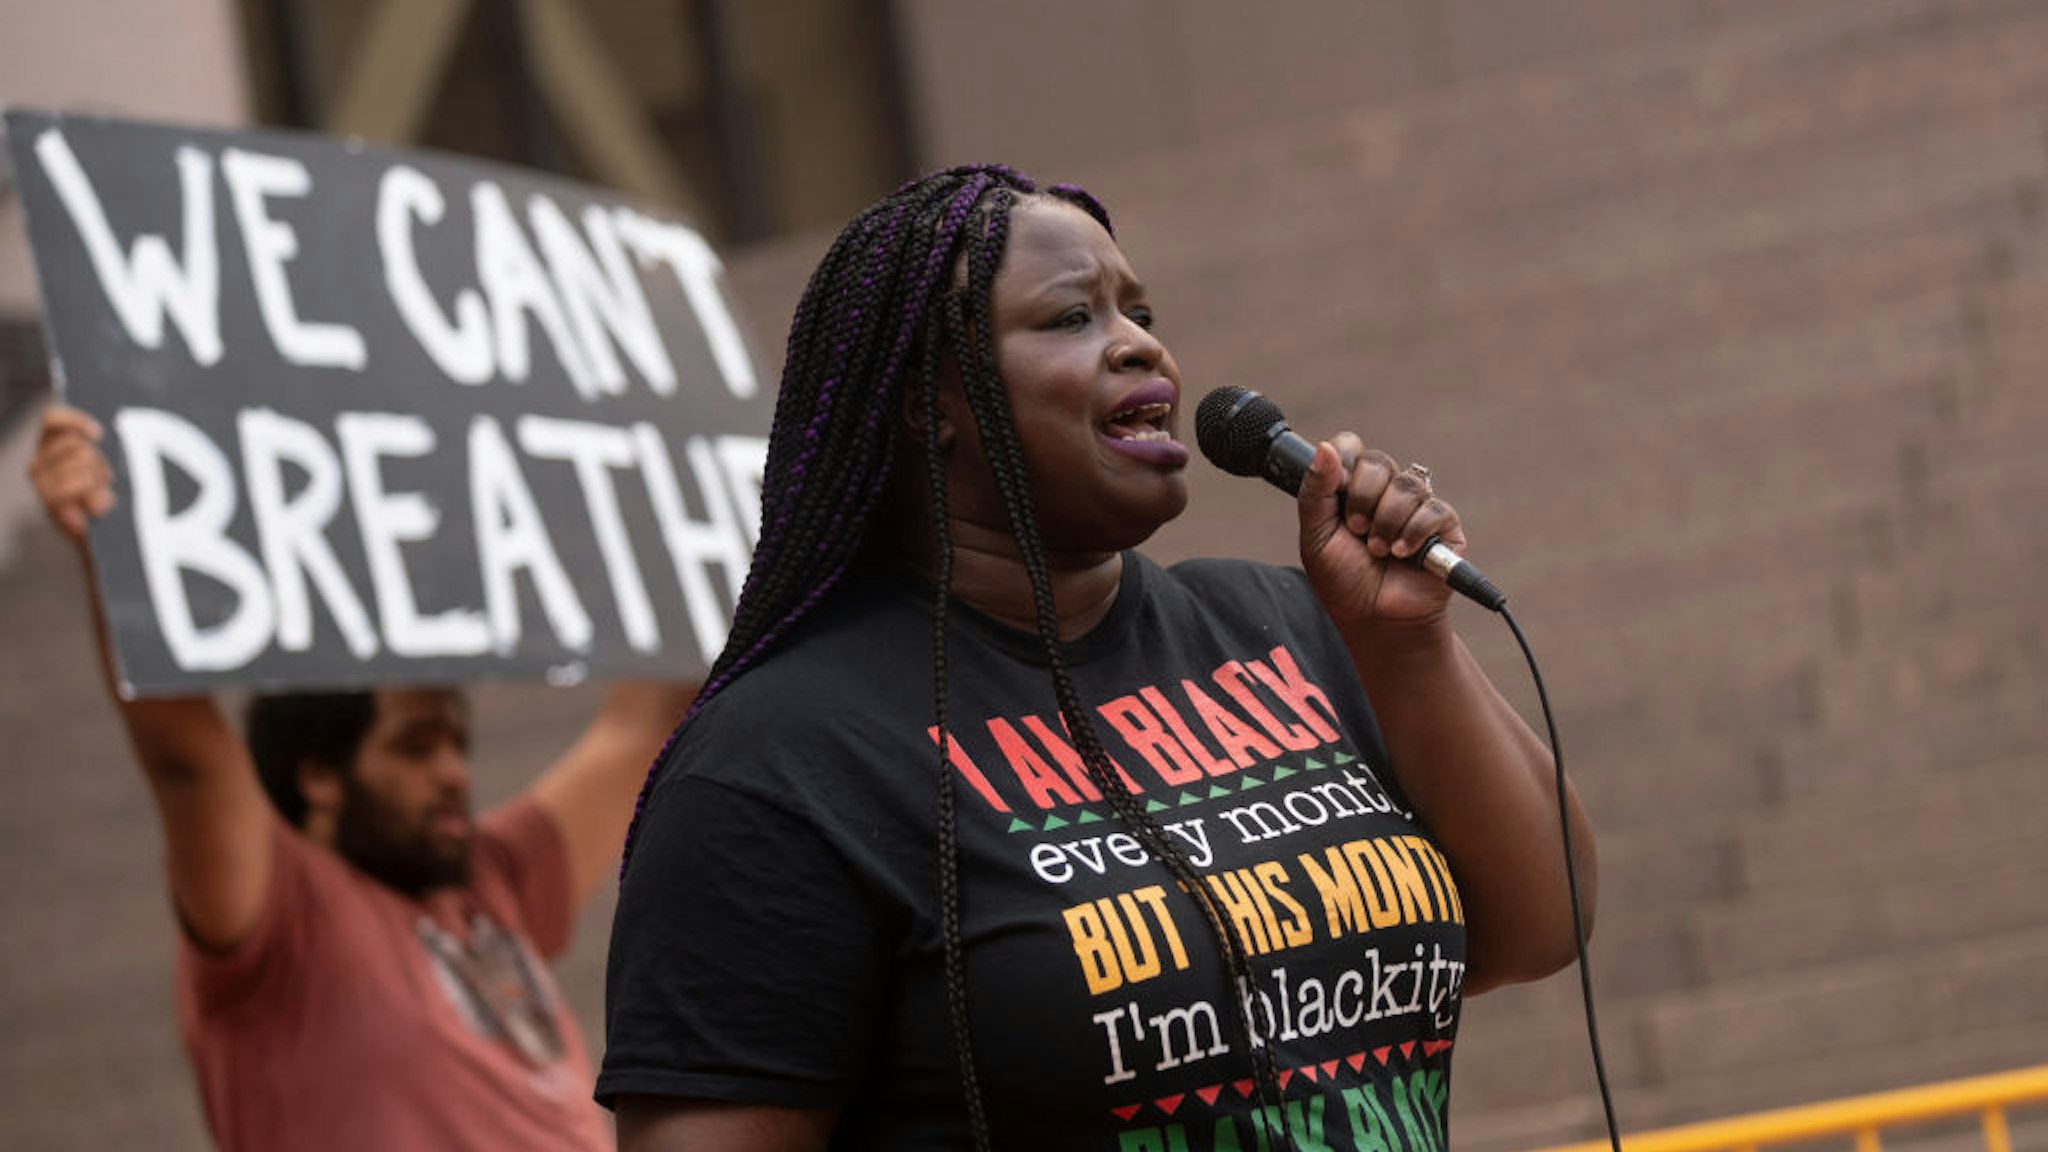 Nekima Levy Armstrong, civil rights lawyer and former candidate for Minneapolis Mayor, speaks at a rally outside the Hennepin County Government Center on June 11, 2020 in Minneapolis, Minnesota. The demonstration called for police reform and justice for George Floyd who was killed by members of the Minneapolis Police Department on May 25. (Photo by Stephen Maturen/Getty Images)